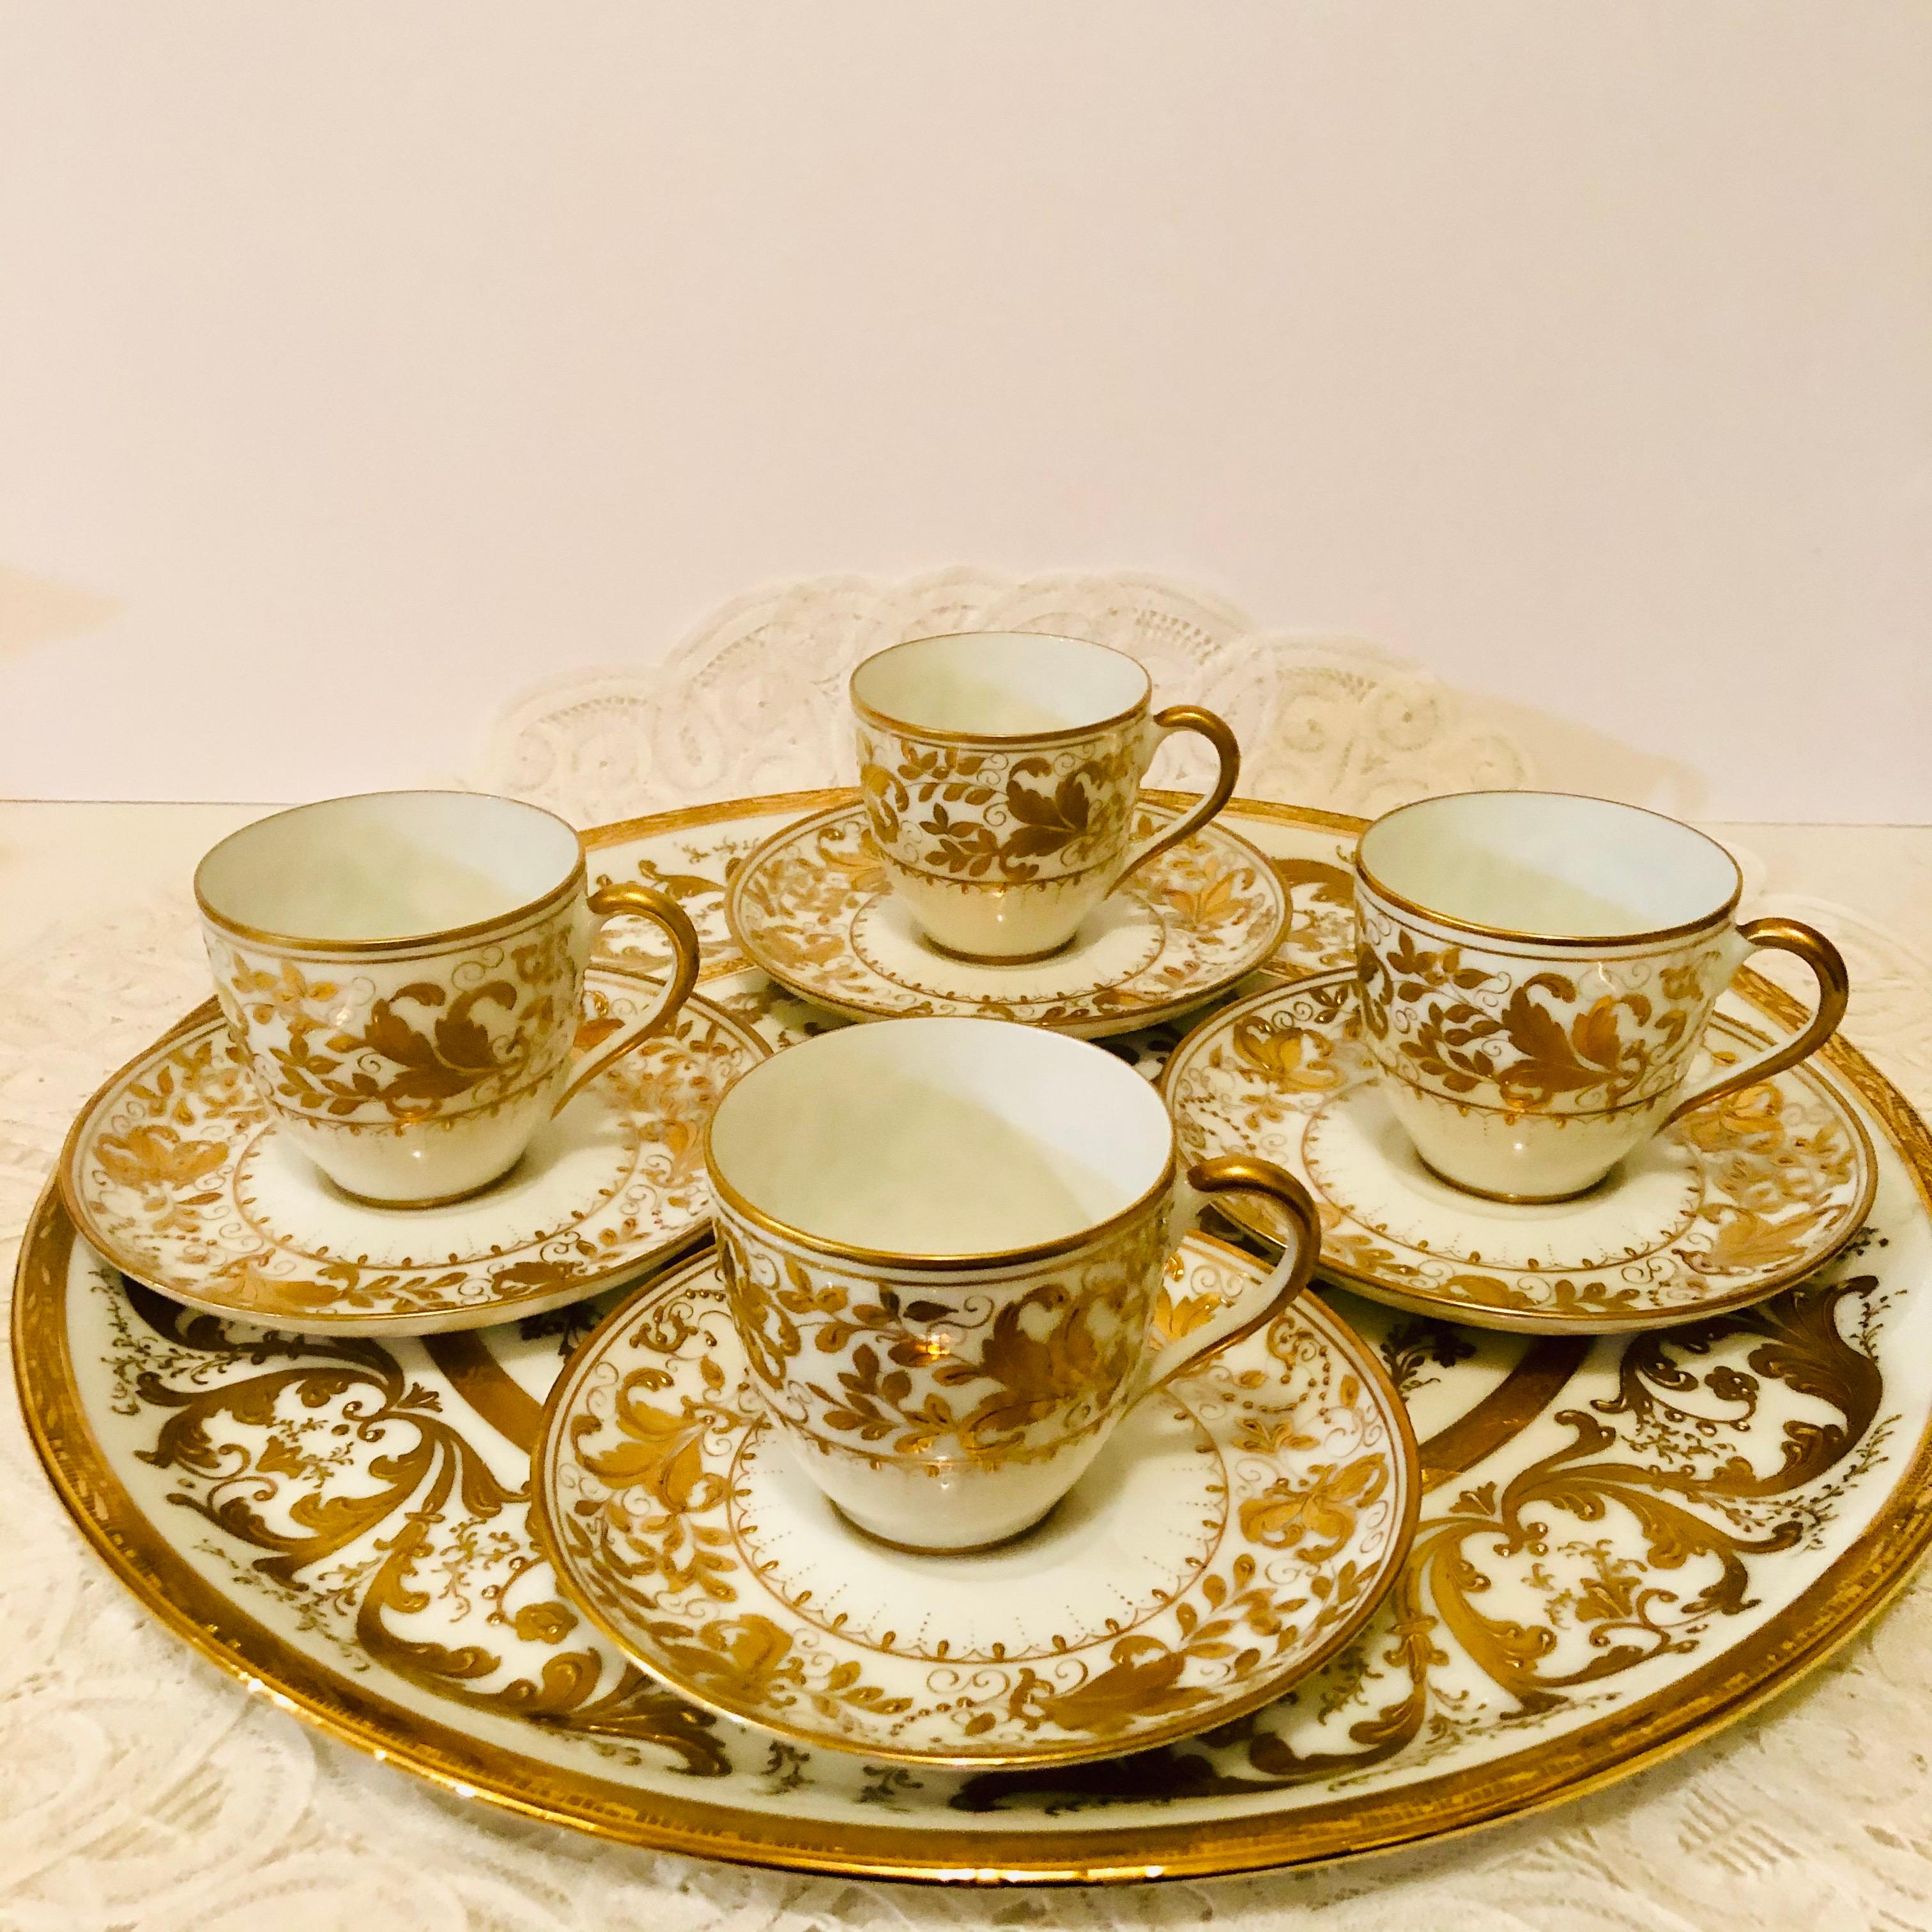 Gilt Le Tallec Set of 4 Demitasse Cups and Matching Tray with Profuse Raised Gilding For Sale